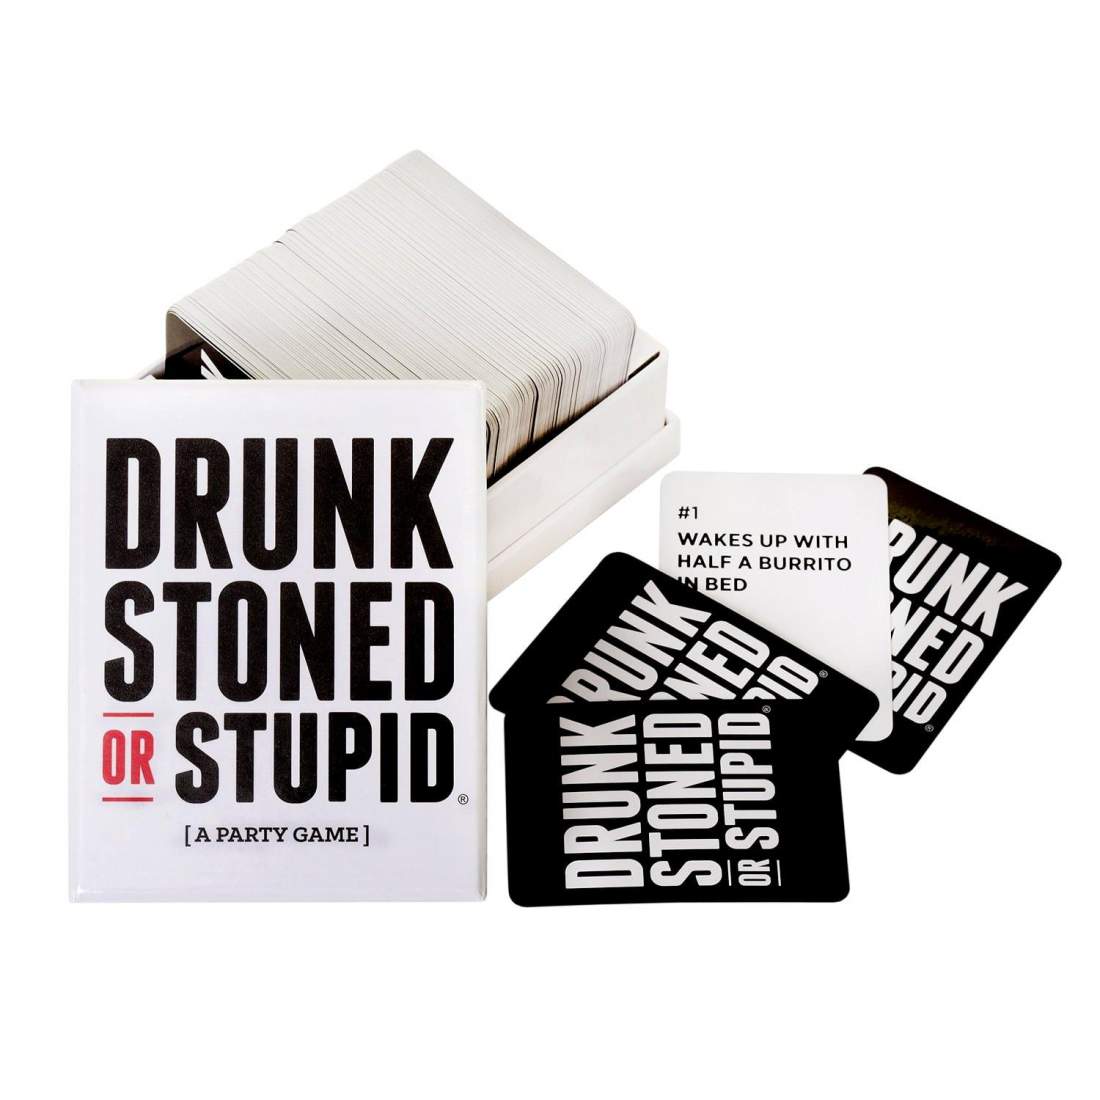 DRUNK STONED